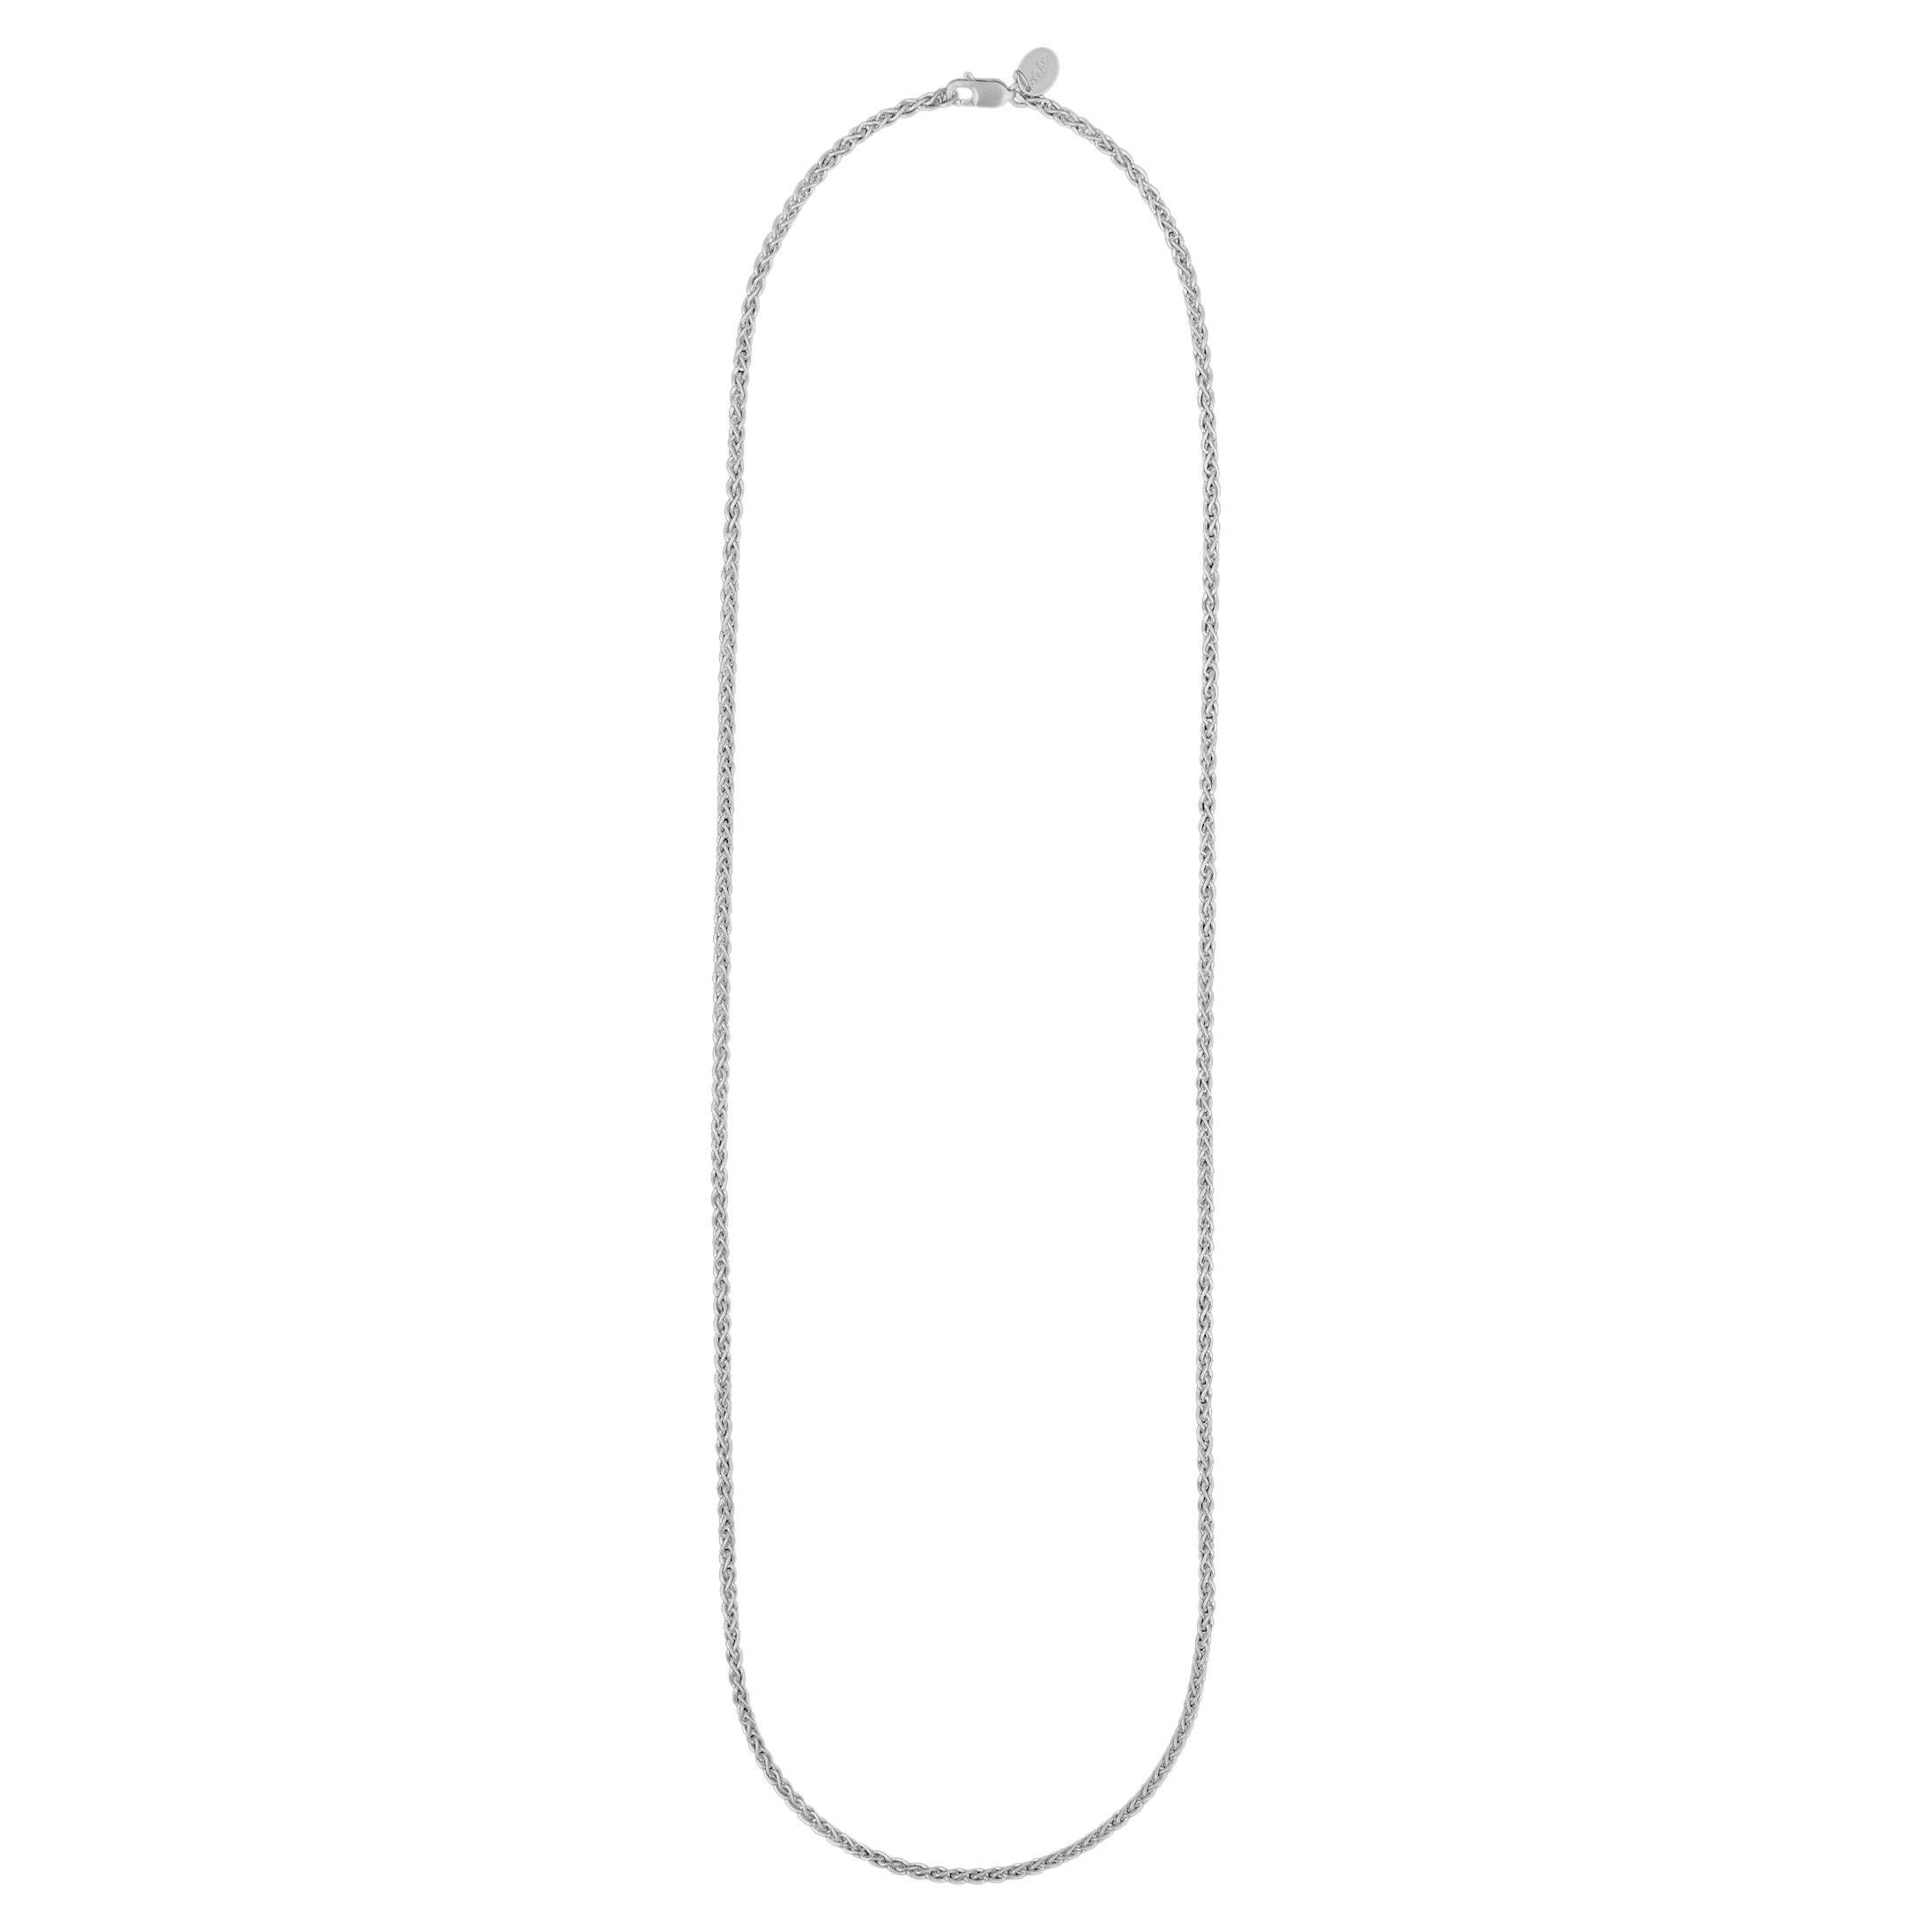 Tiana Marie Combes White Gold Woven Chain Necklace